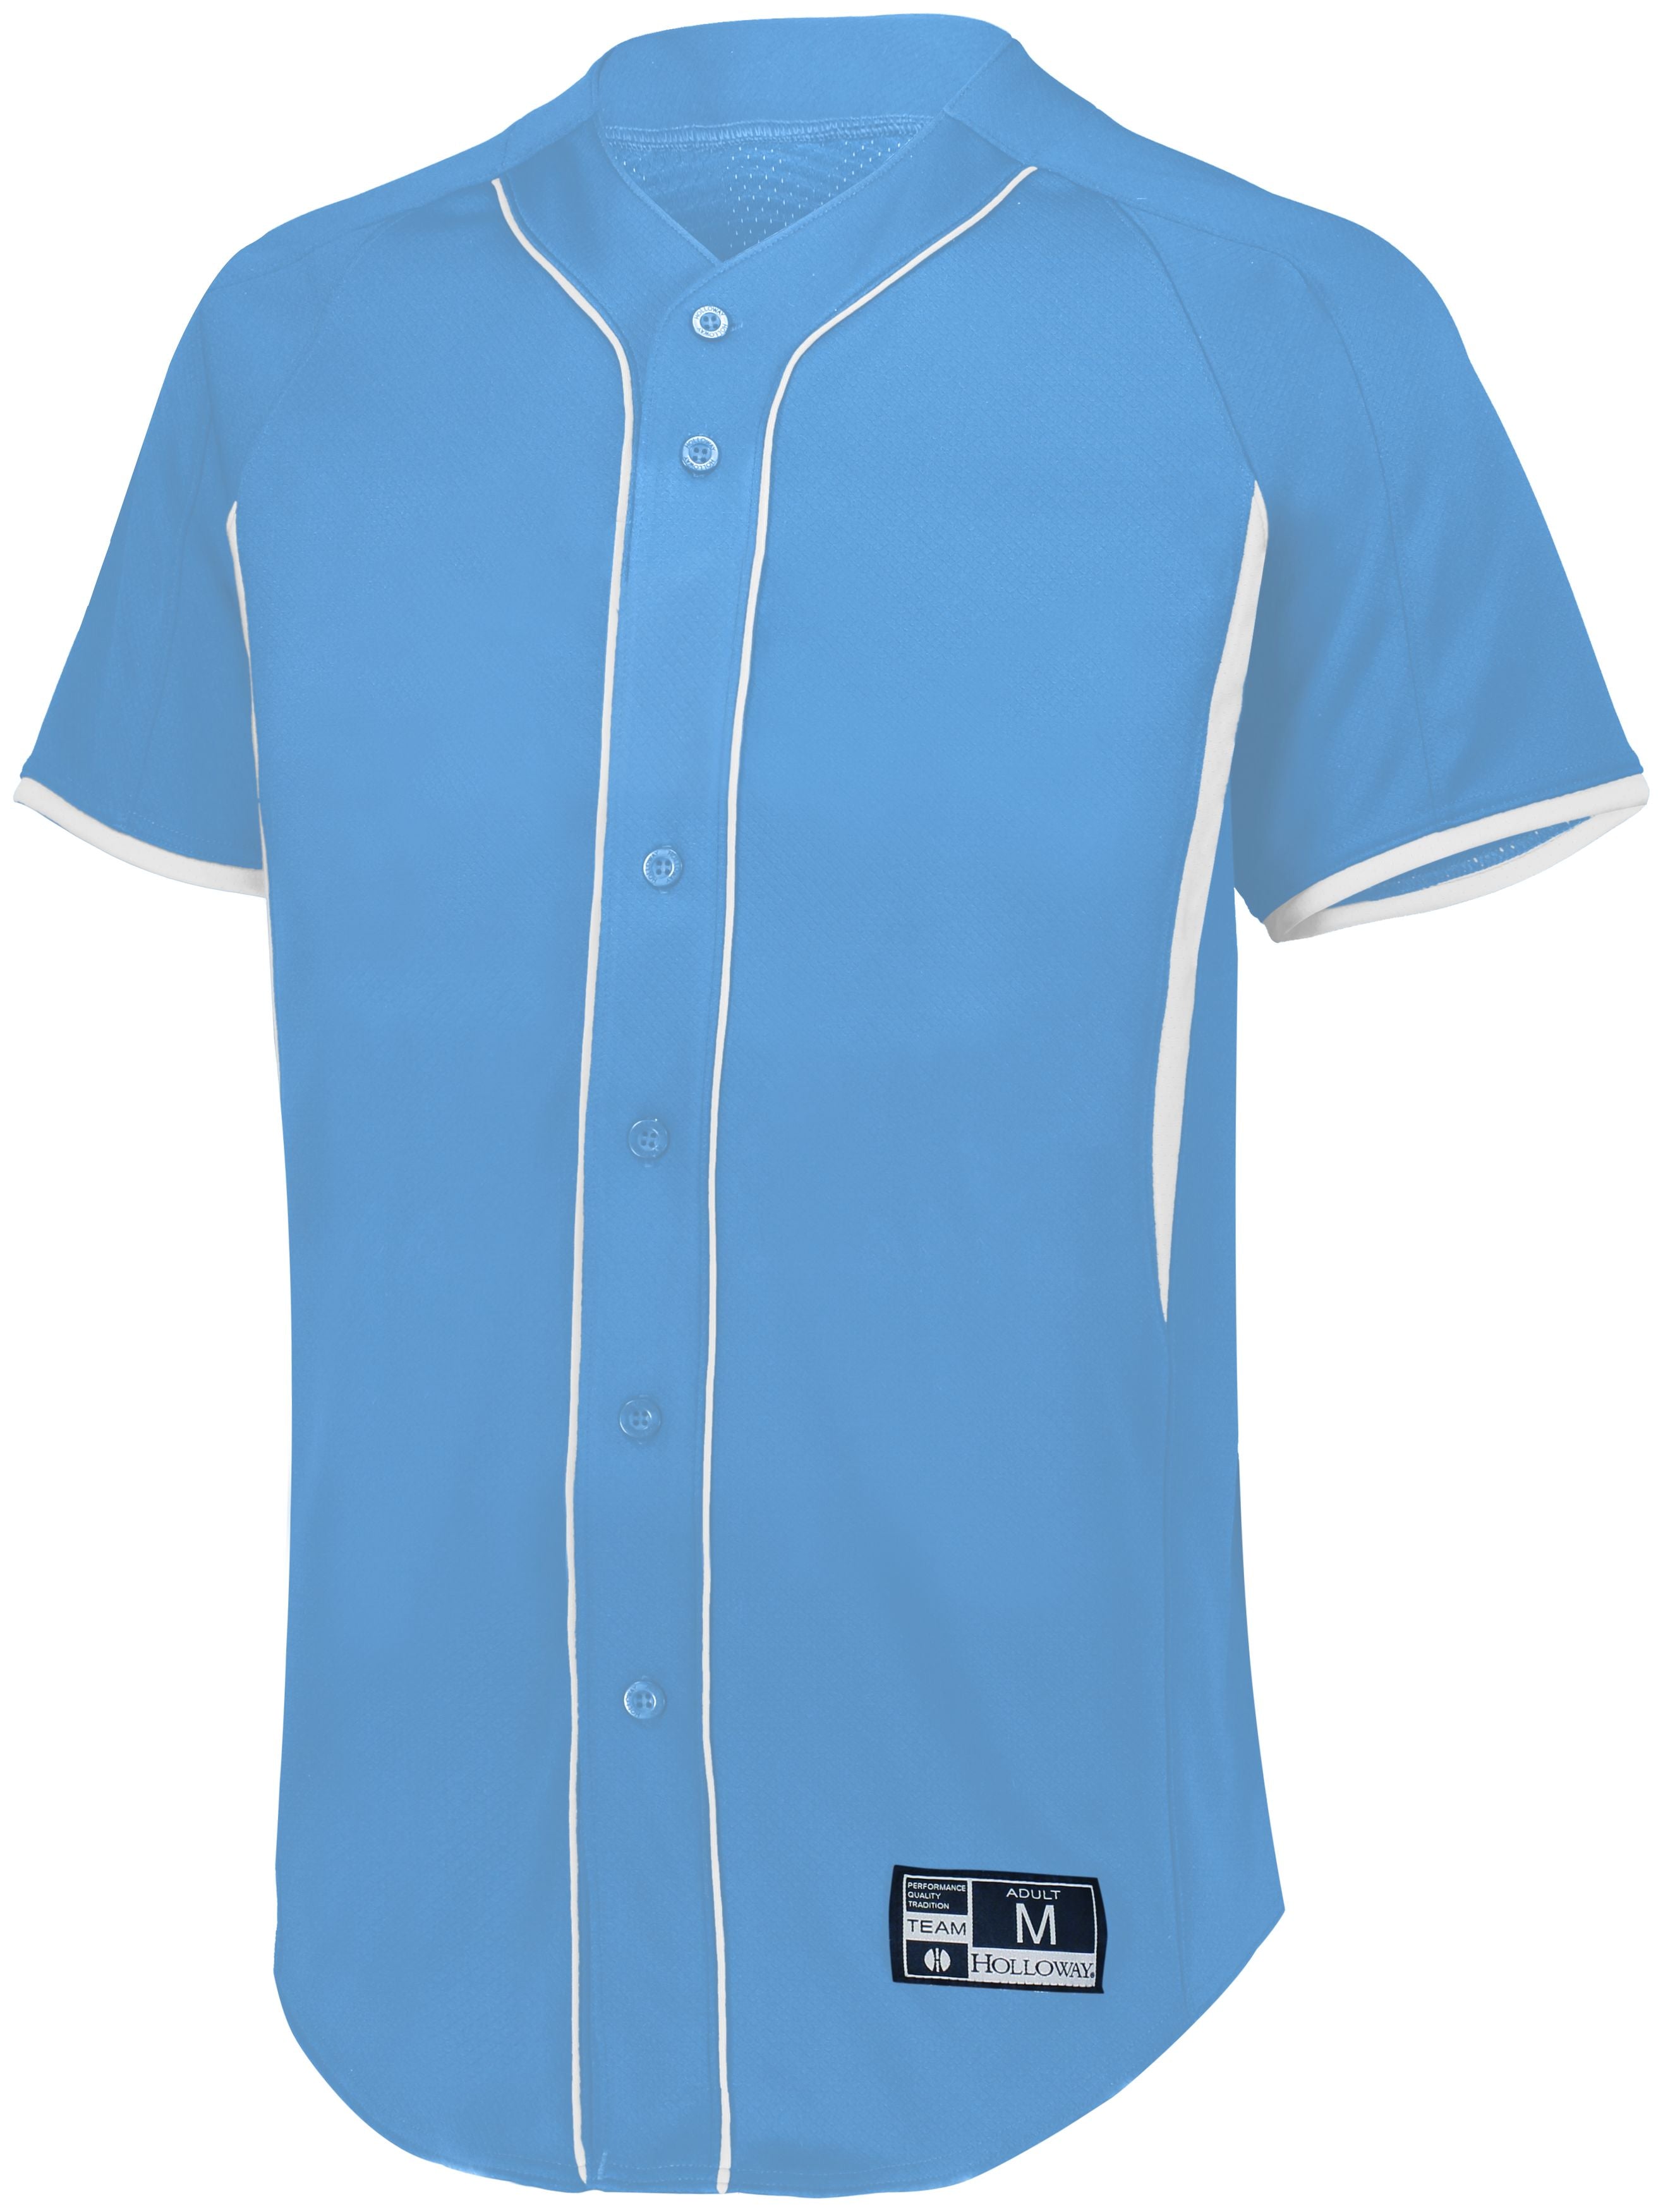 Holloway Game7 Full-Button Baseball Jersey in University Blue/White  -Part of the Adult, Adult-Jersey, Baseball, Holloway, Shirts, All-Sports, All-Sports-1 product lines at KanaleyCreations.com